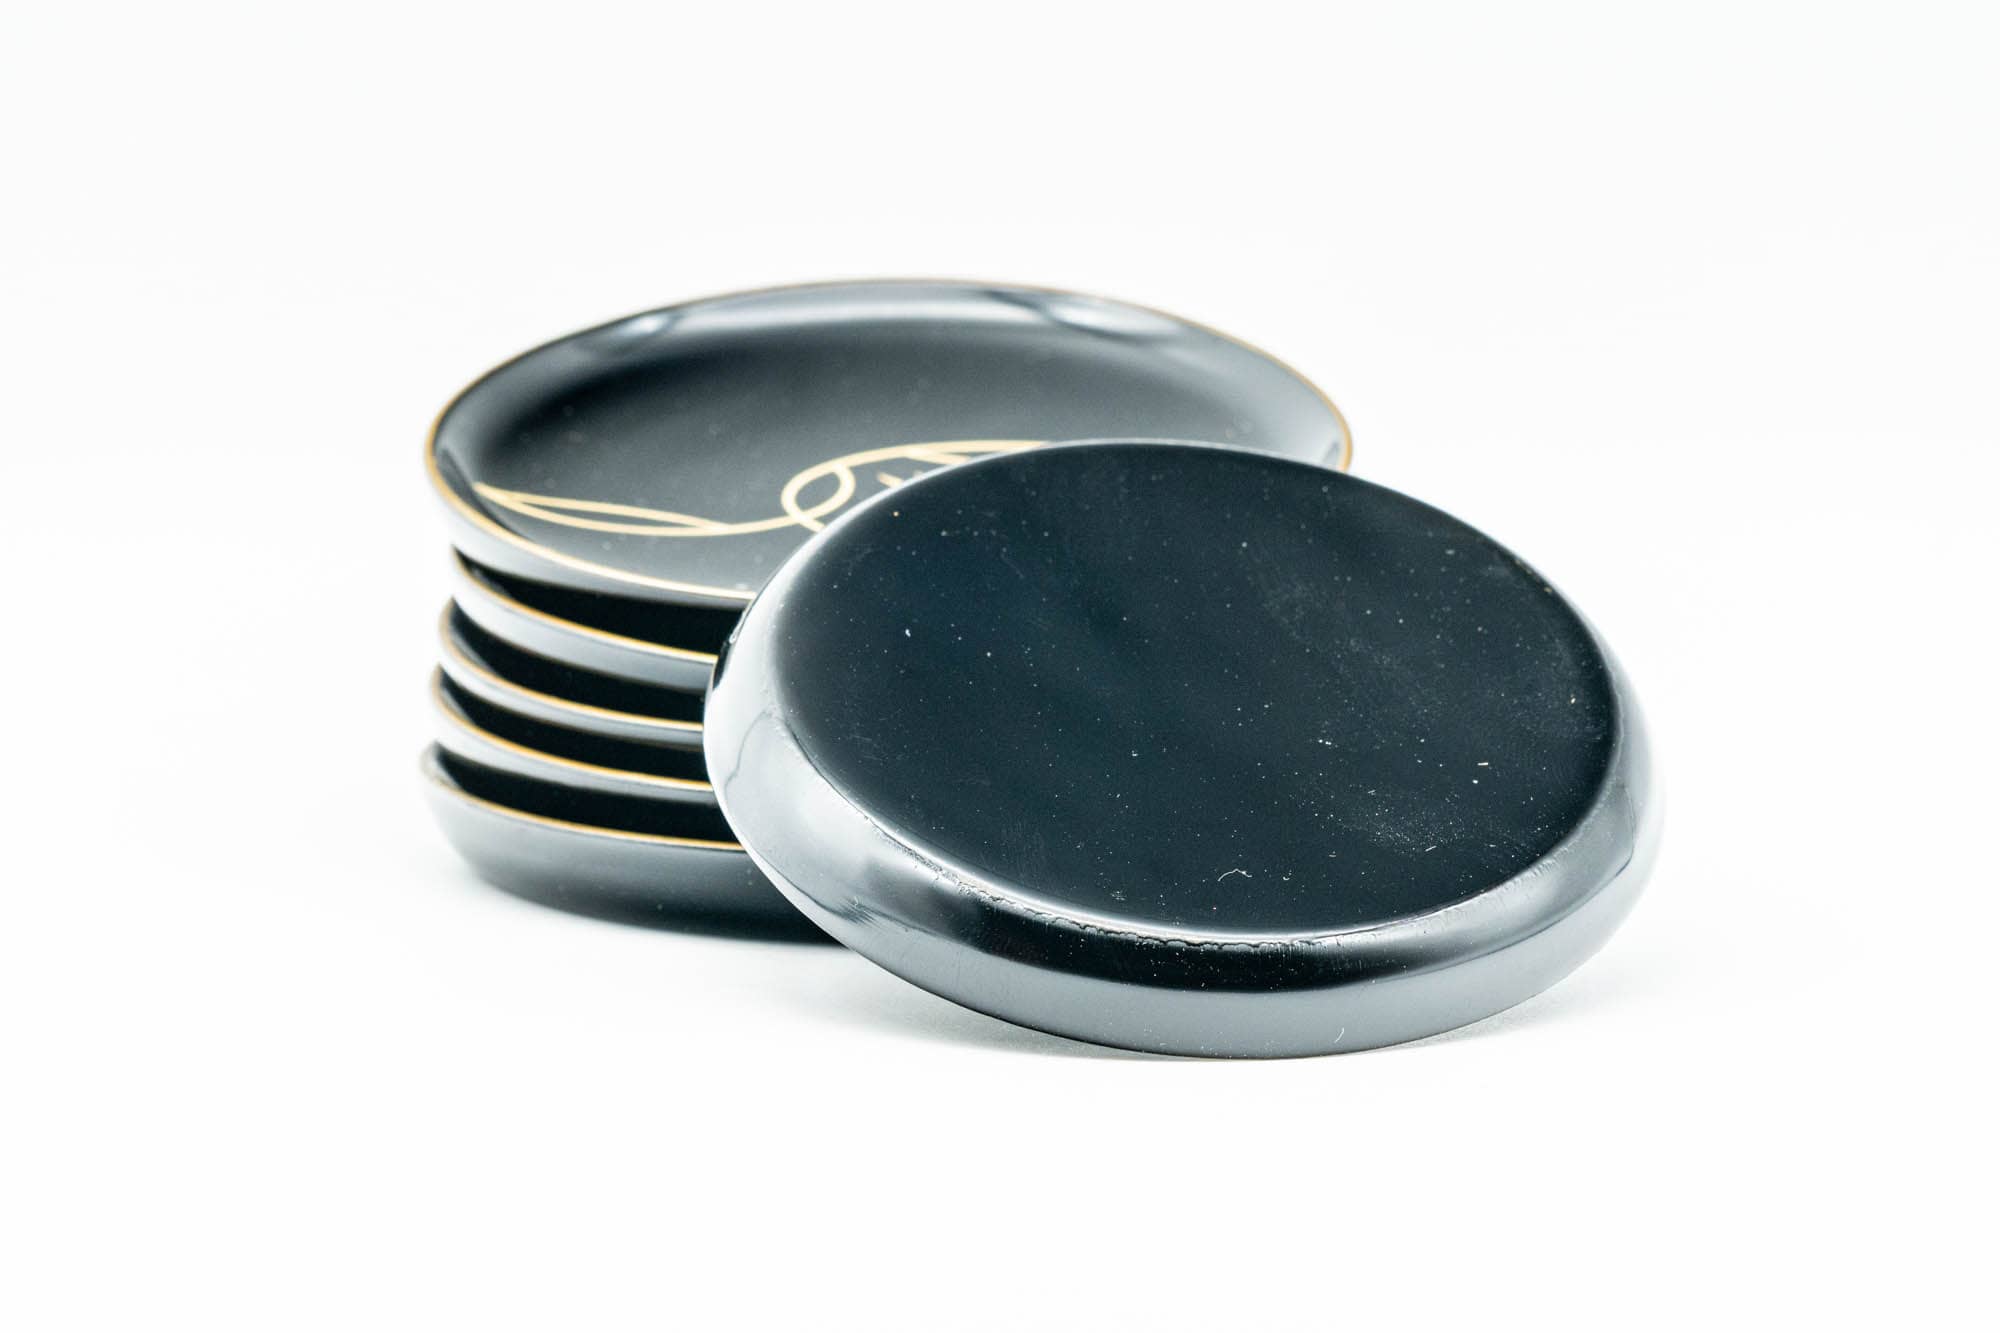 Japanese Chataku - Set of 6 Black Lacquer Tea Saucers in Caddy and Wooden Box